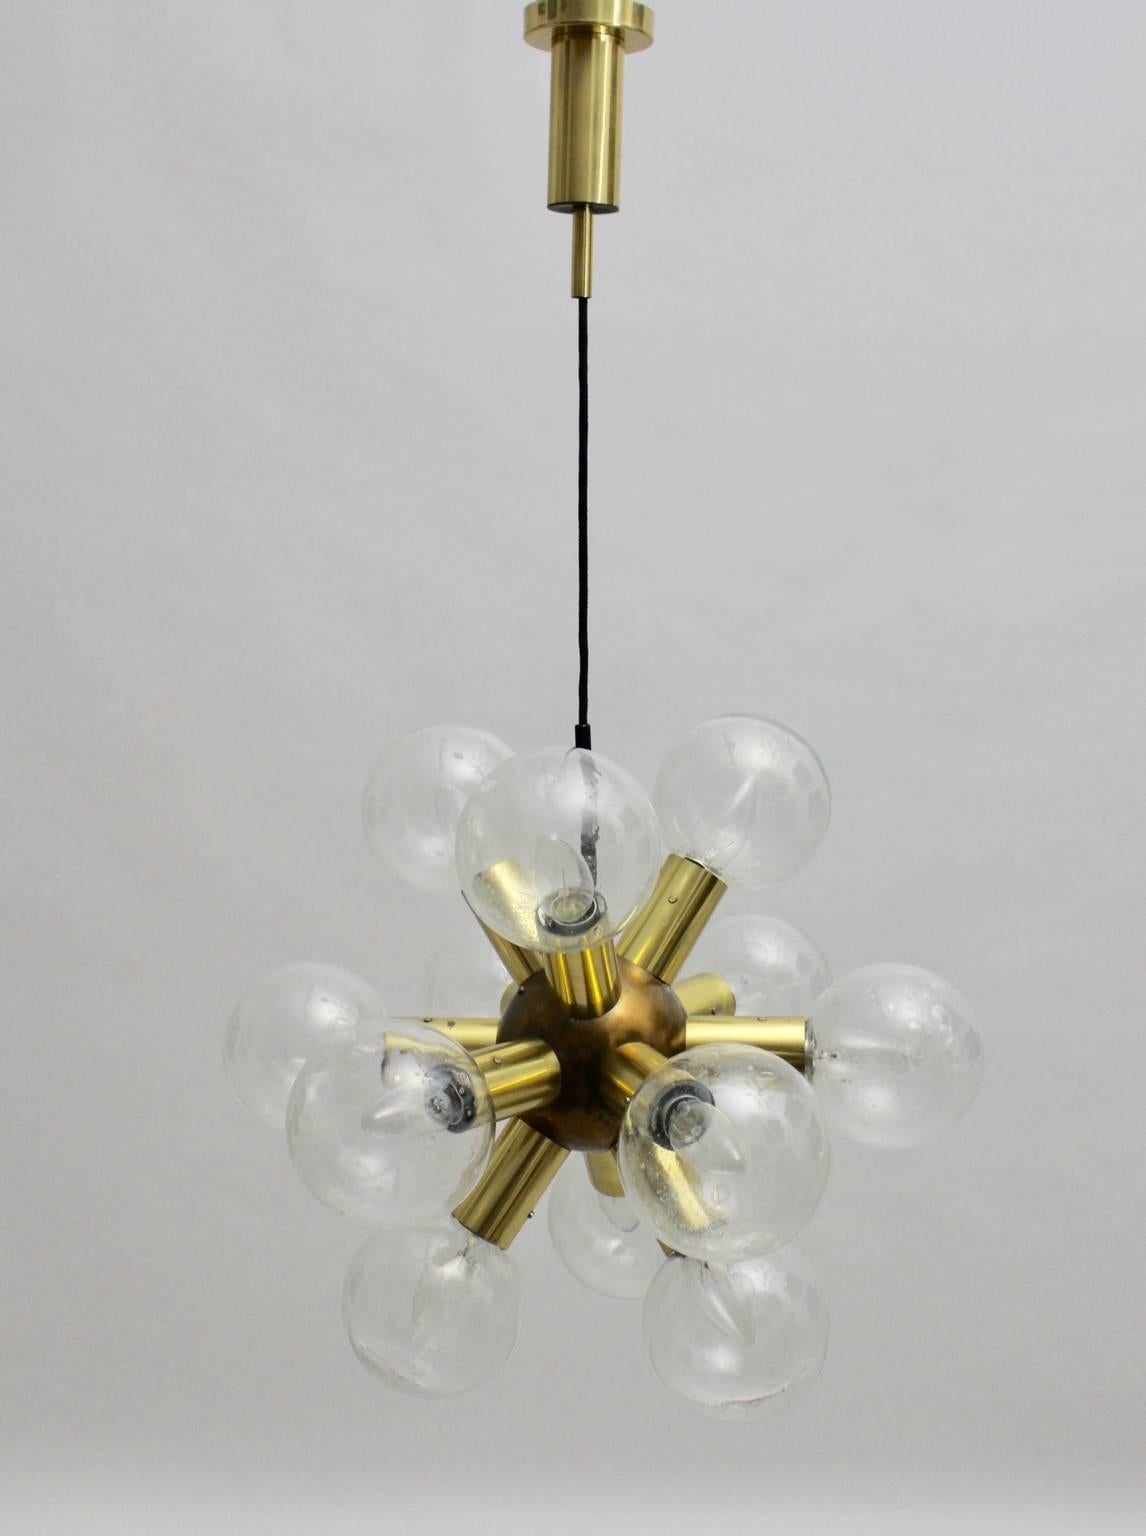 Mid Century Modern vintage sputnik chandelier from brass and glass by J.T.Kalmar.
The sputnik chandelier was designed and executed by the Viennese lighting firm J.T.Kalmar, 1970.
The atomic chandelier has twelve brass sockets E 14 and twelve